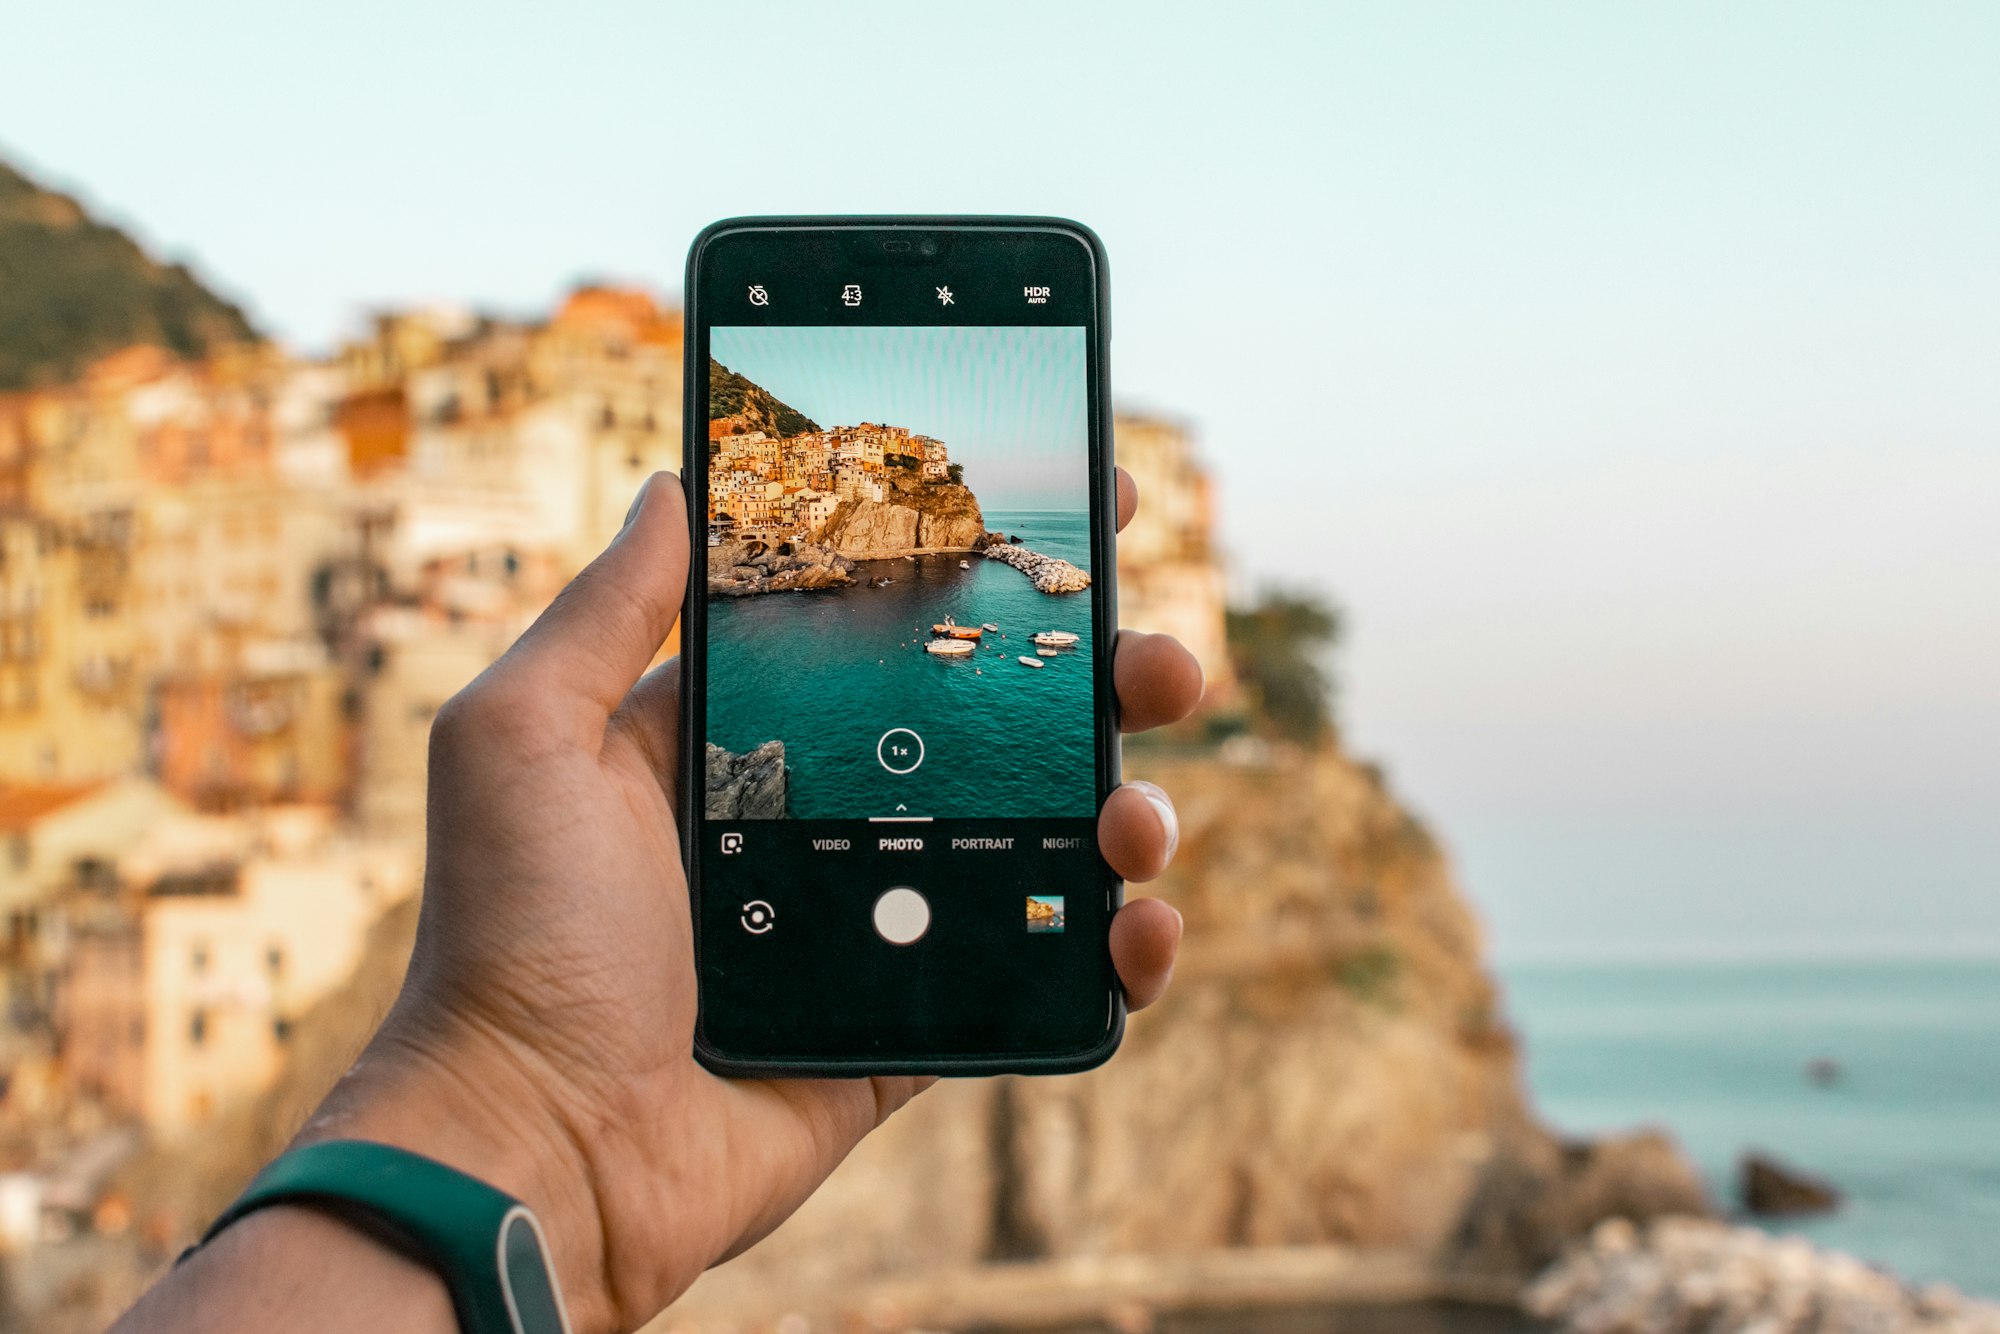 50 vacation captions for Instagram to use this summer